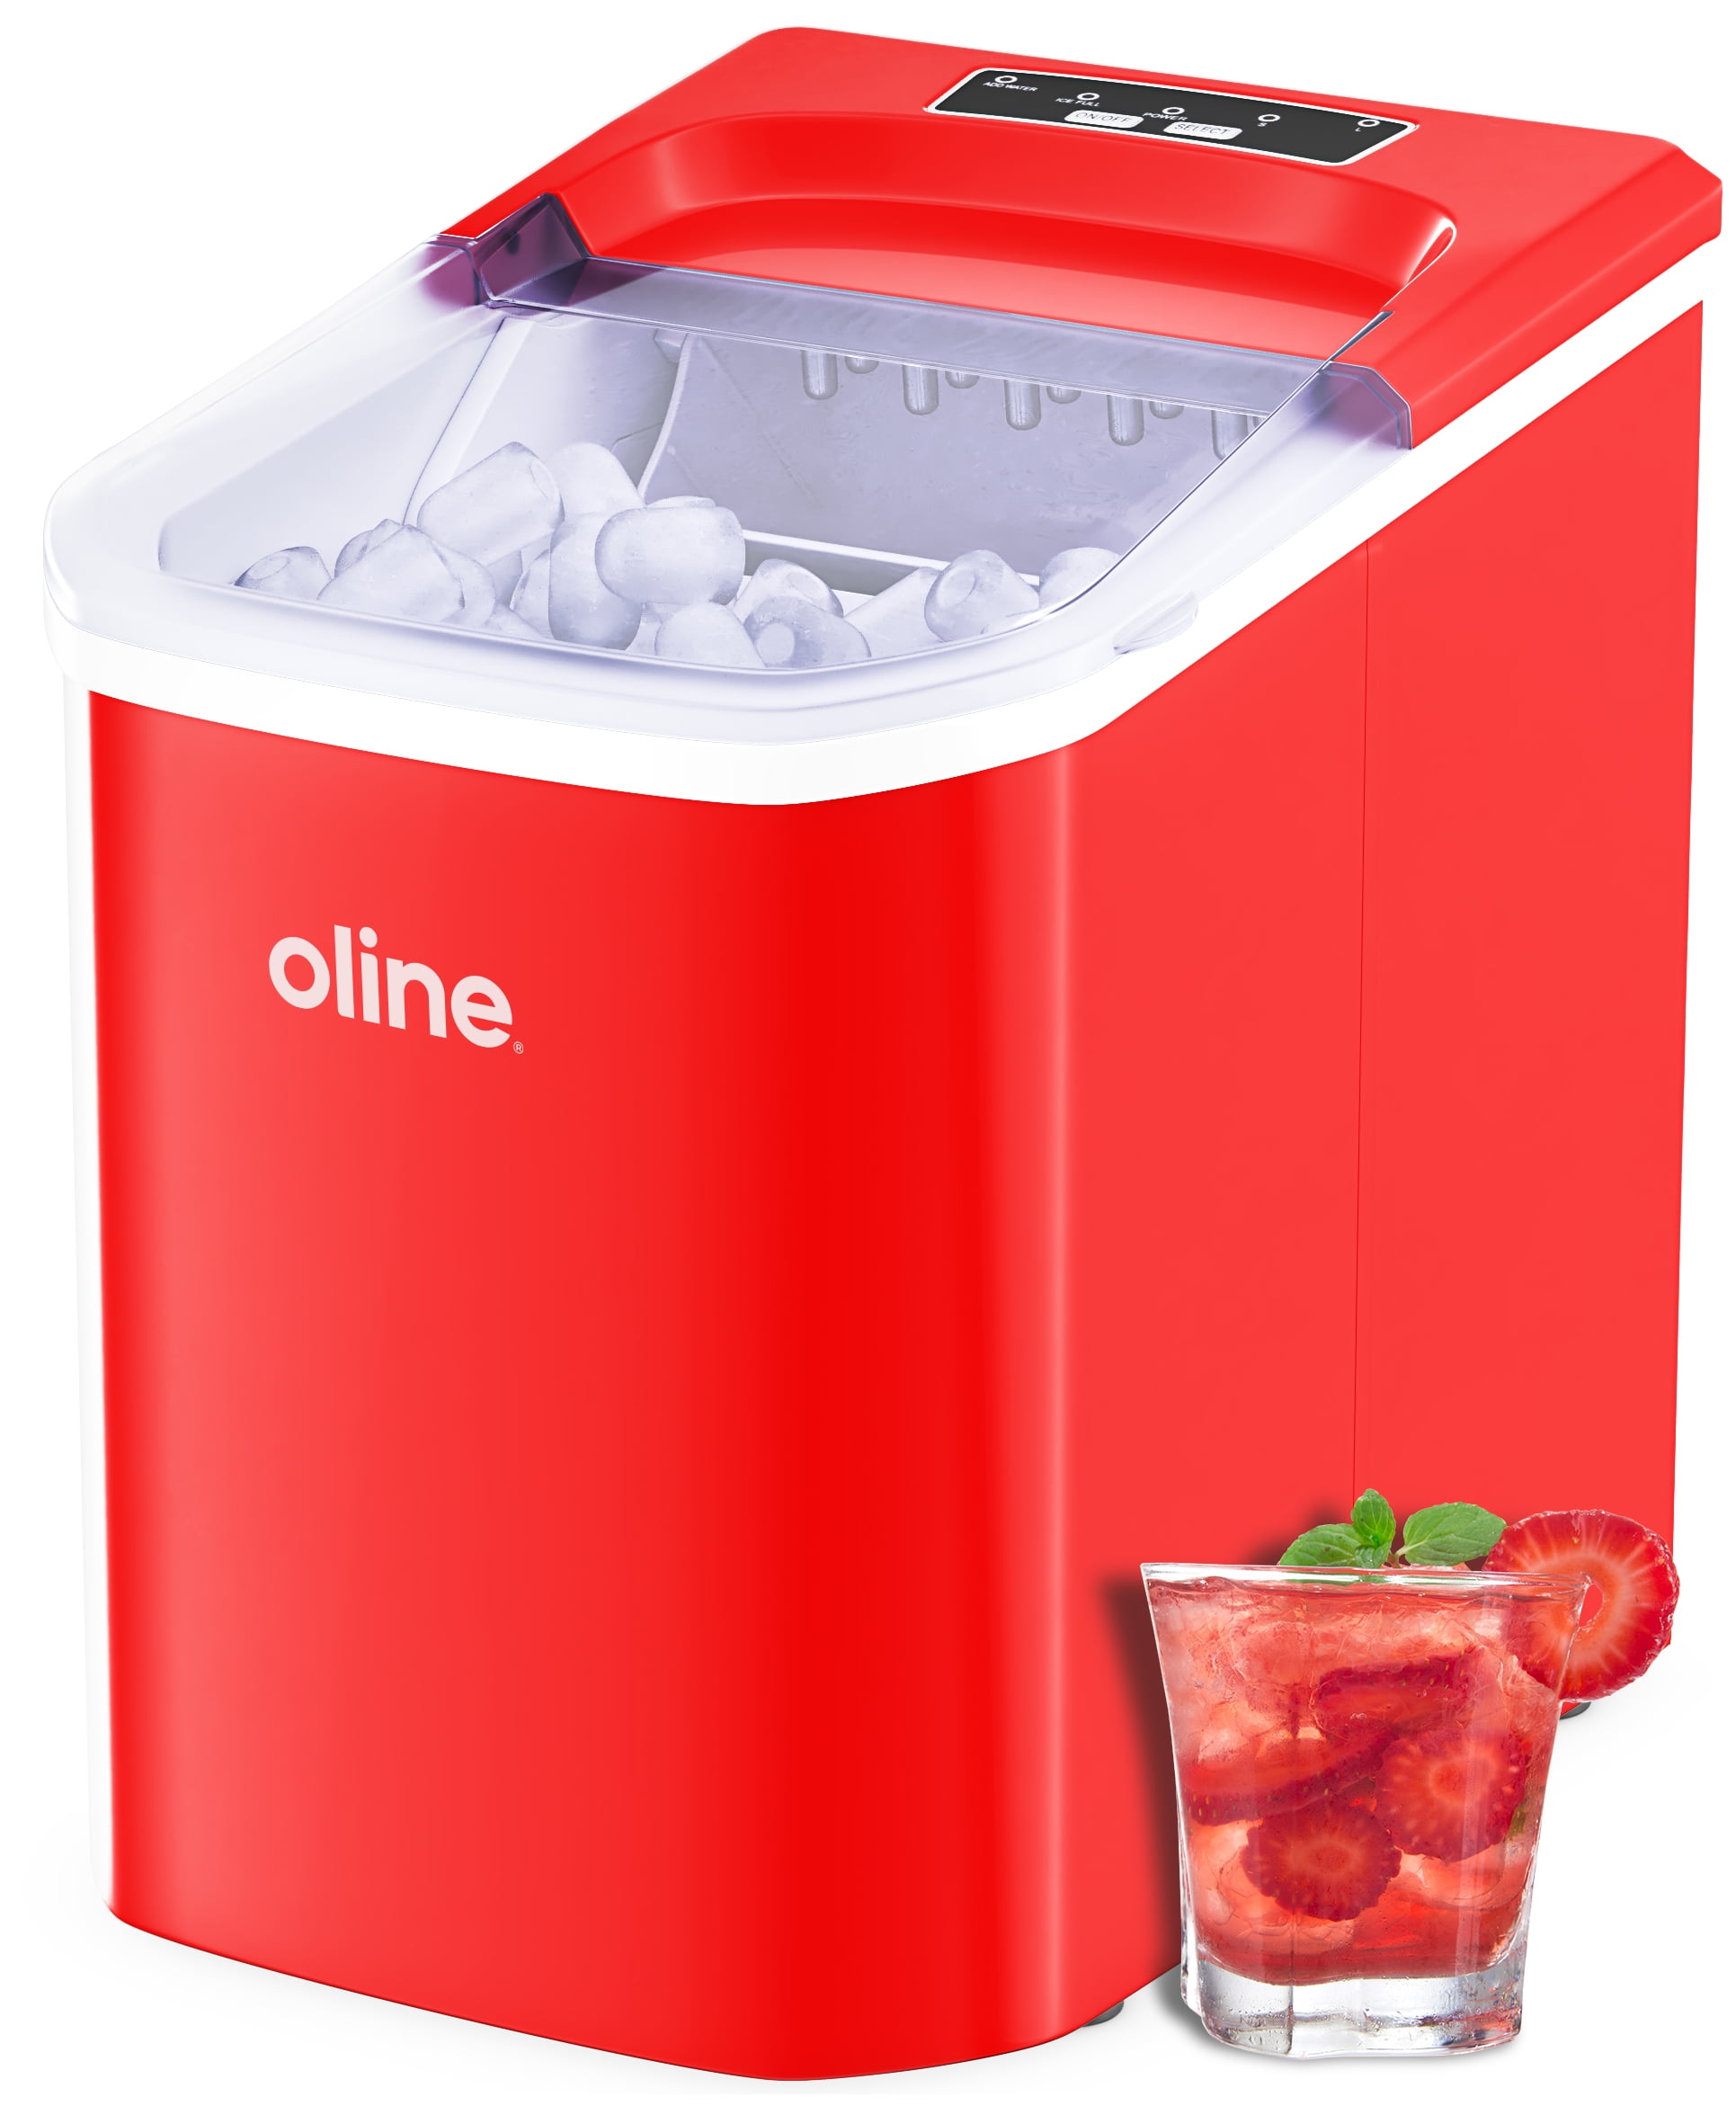 Red Yield Up To 26 Pounds of Ice Daily Della Portable Ice Maker w/Easy-Touch 